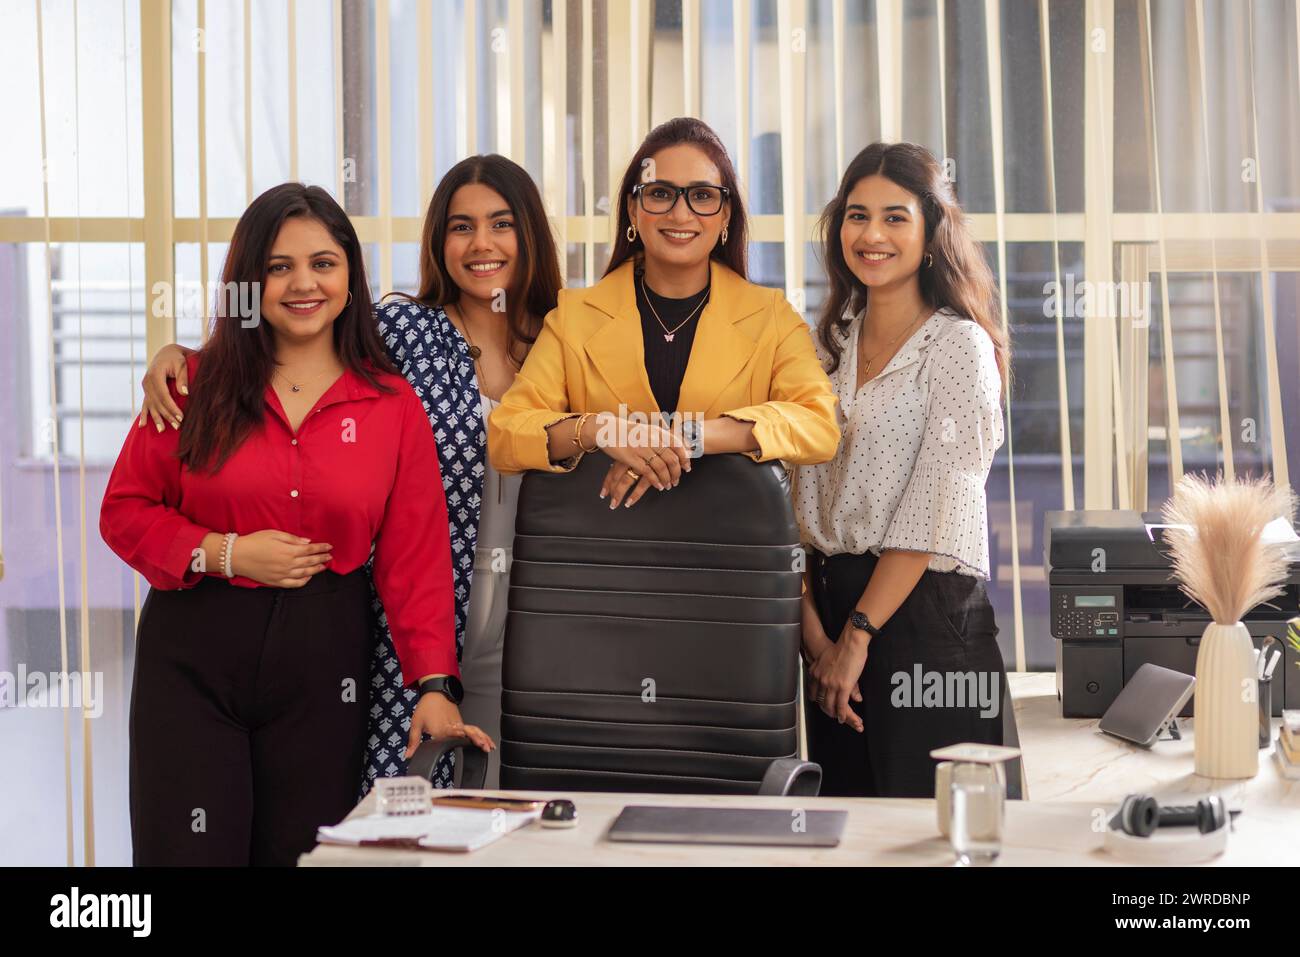 Portrait of a group of businesswomen standing together in an office Stock Photo